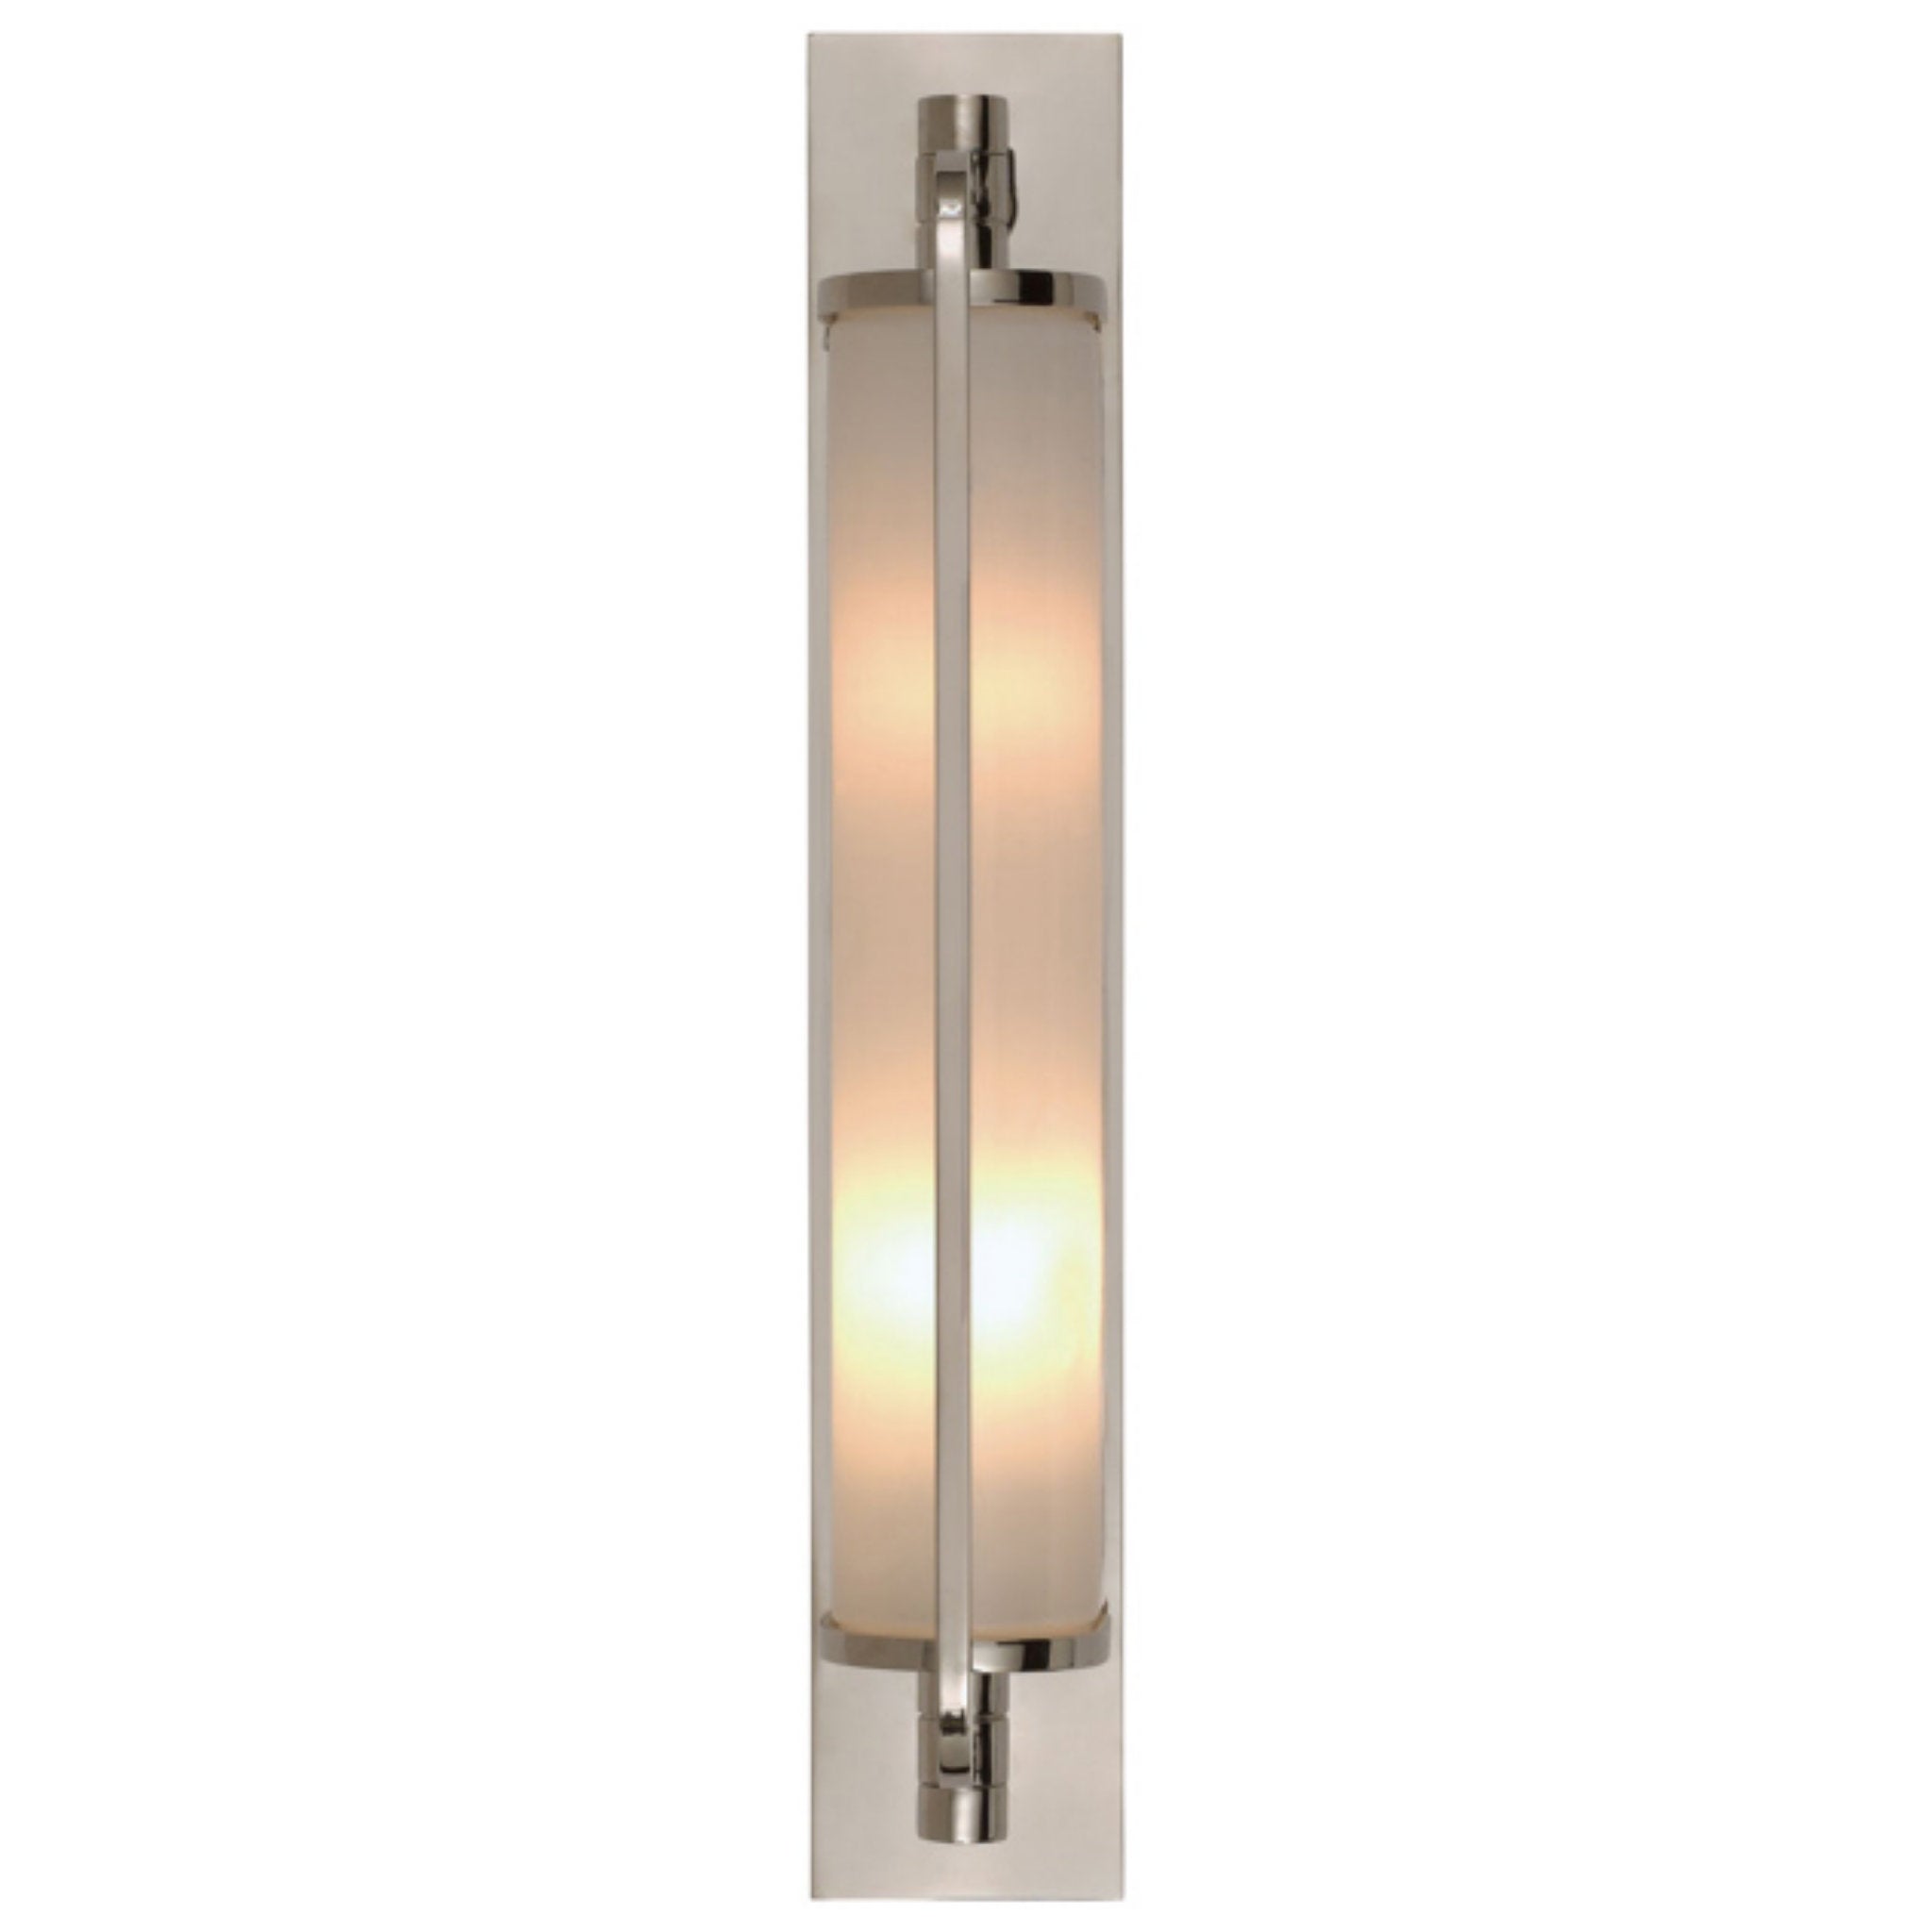 Thomas O'Brien Keeley Tall Pivoting Sconce in Polished Nickel with White Glass